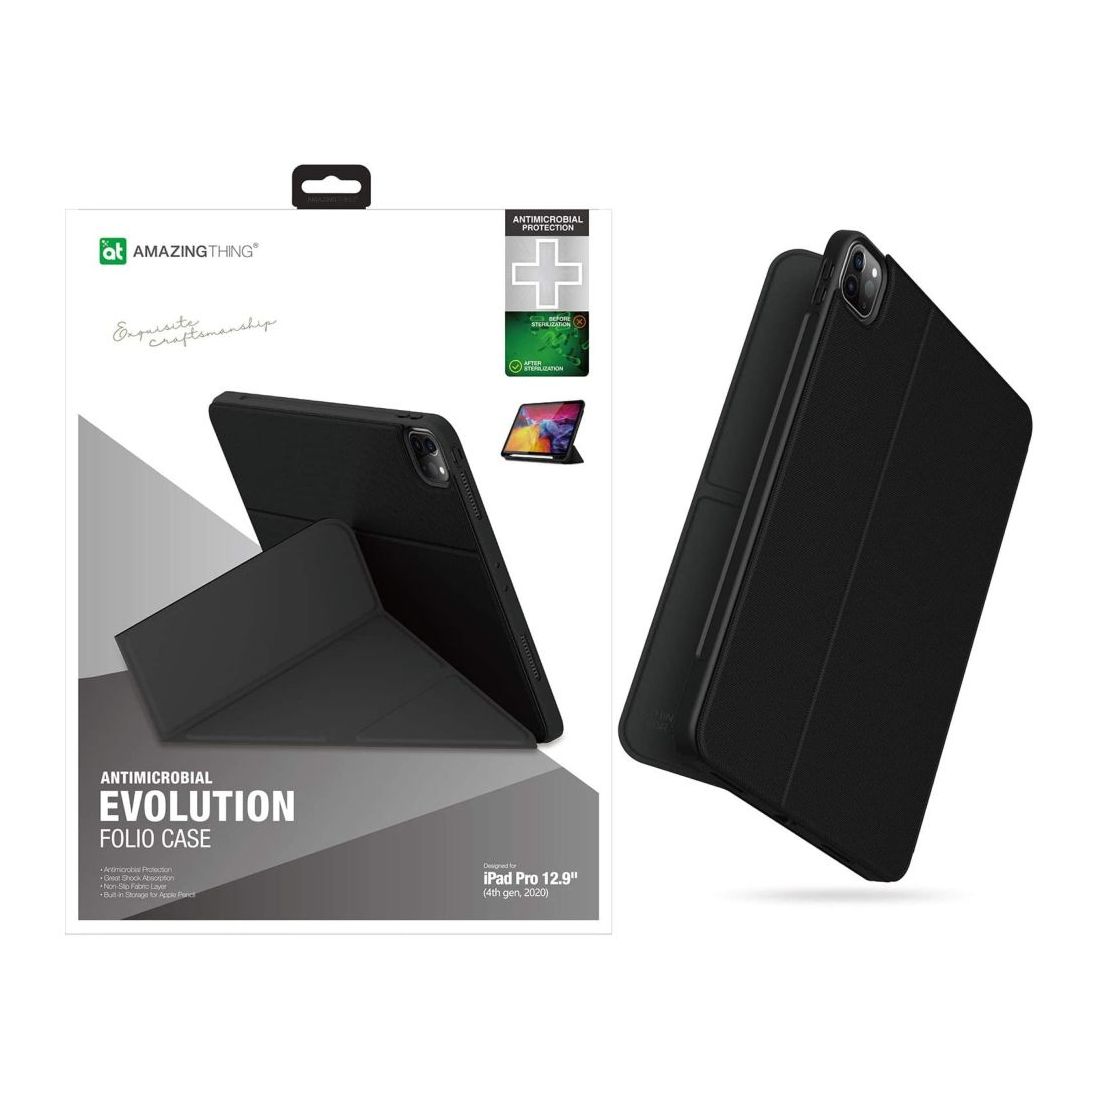 Amazing Thing Bacterial Protection Evolution Folio Case Black for iPad Pro 12.9-Inch with Pencil Holder